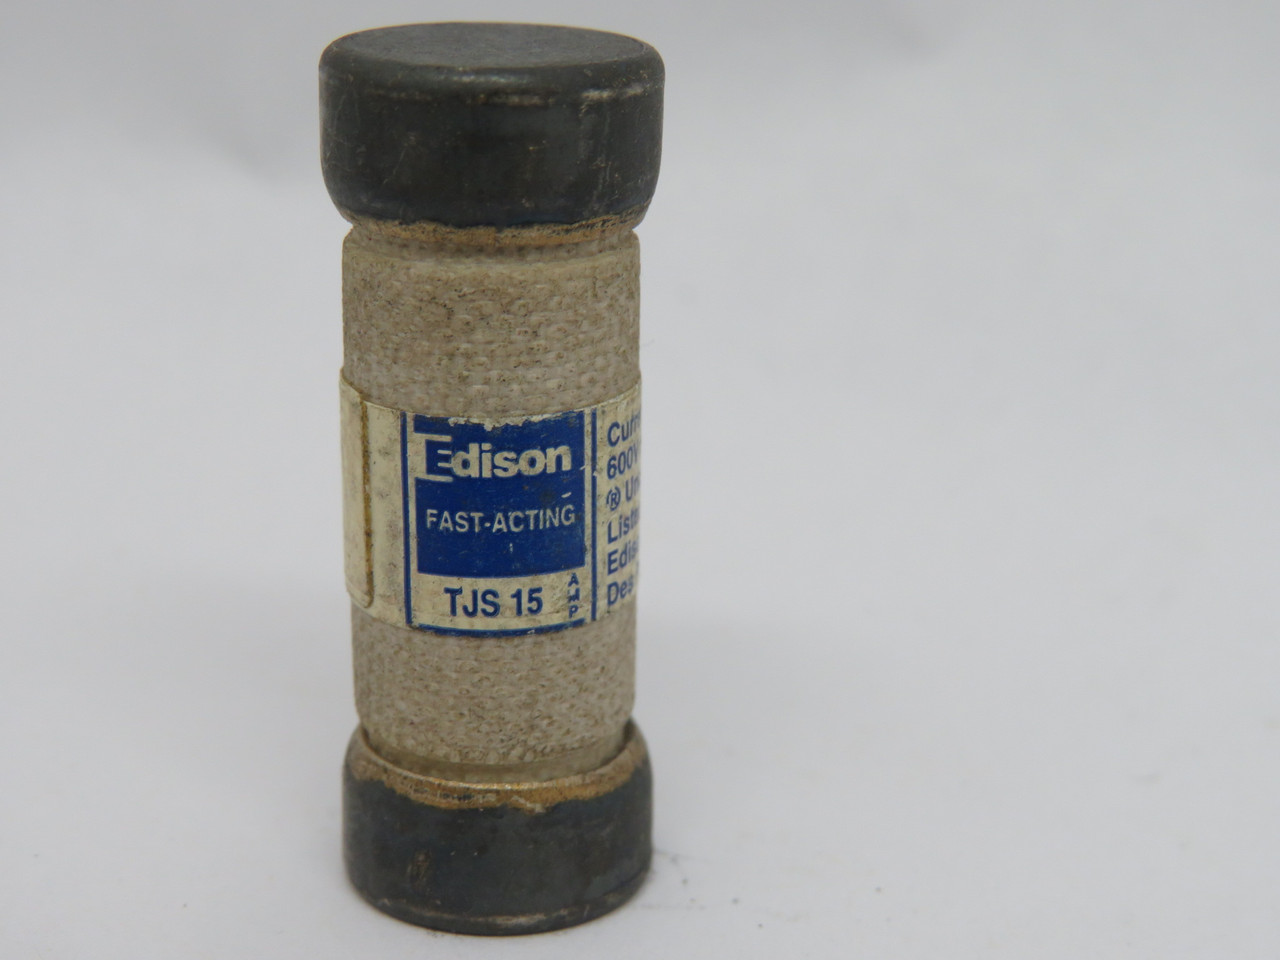 Edison TJS15 Fast Acting Fuse 15A 600VAC USED